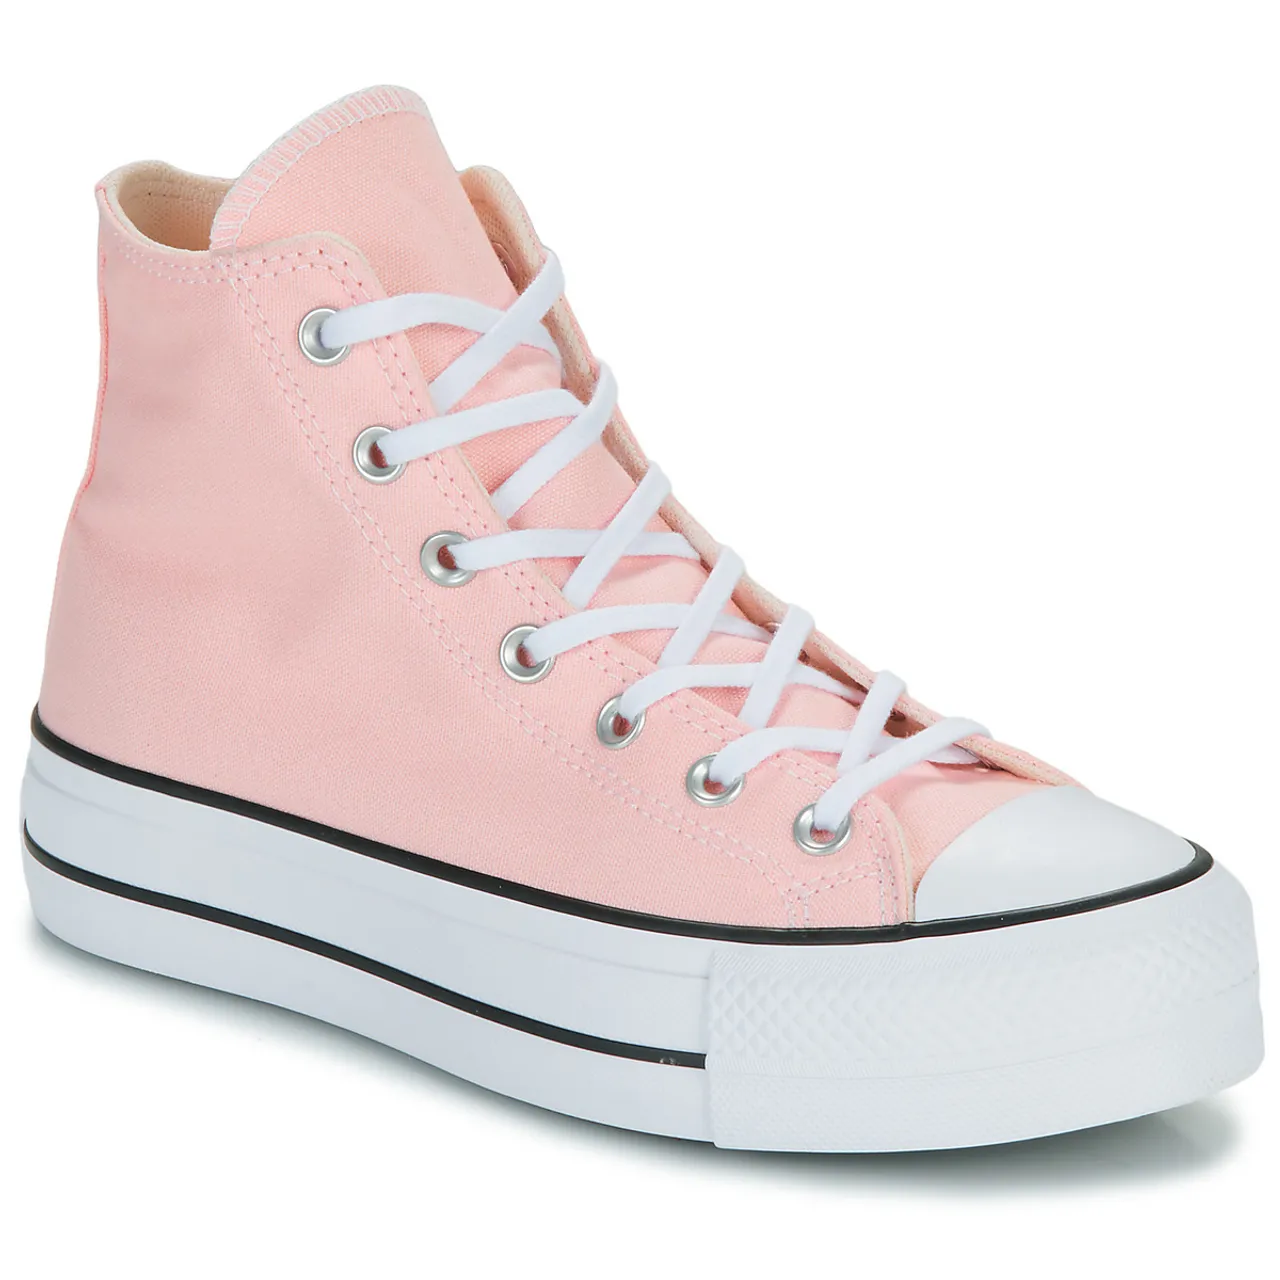 Converse  CHUCK TAYLOR ALL STAR LIFT  women's Shoes (High-top Trainers) in Pink